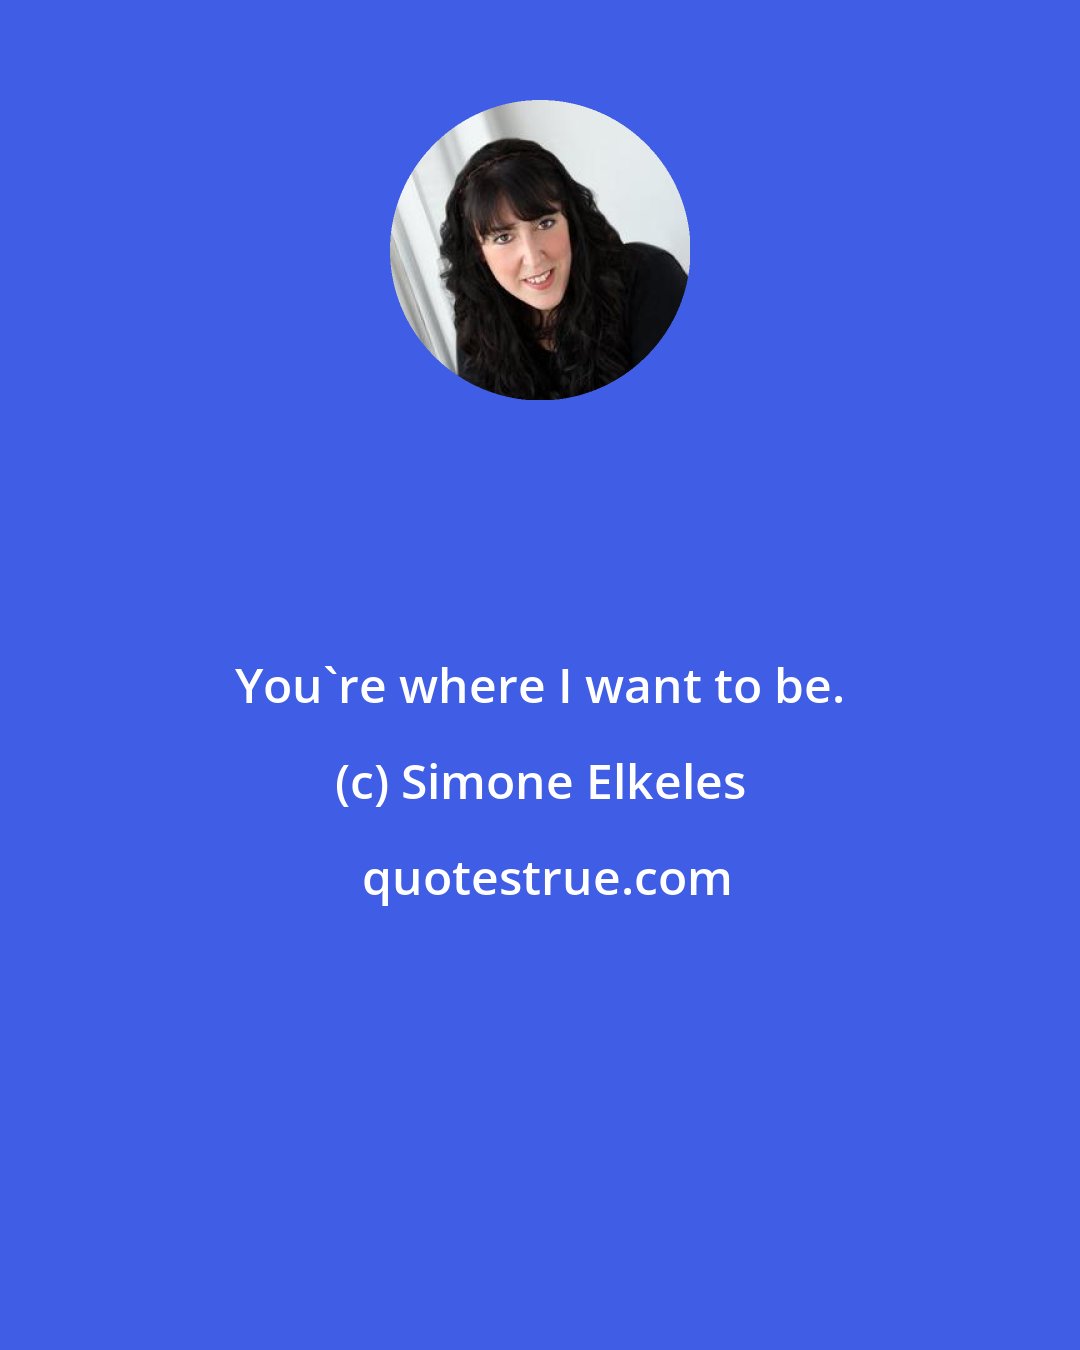 Simone Elkeles: You're where I want to be.